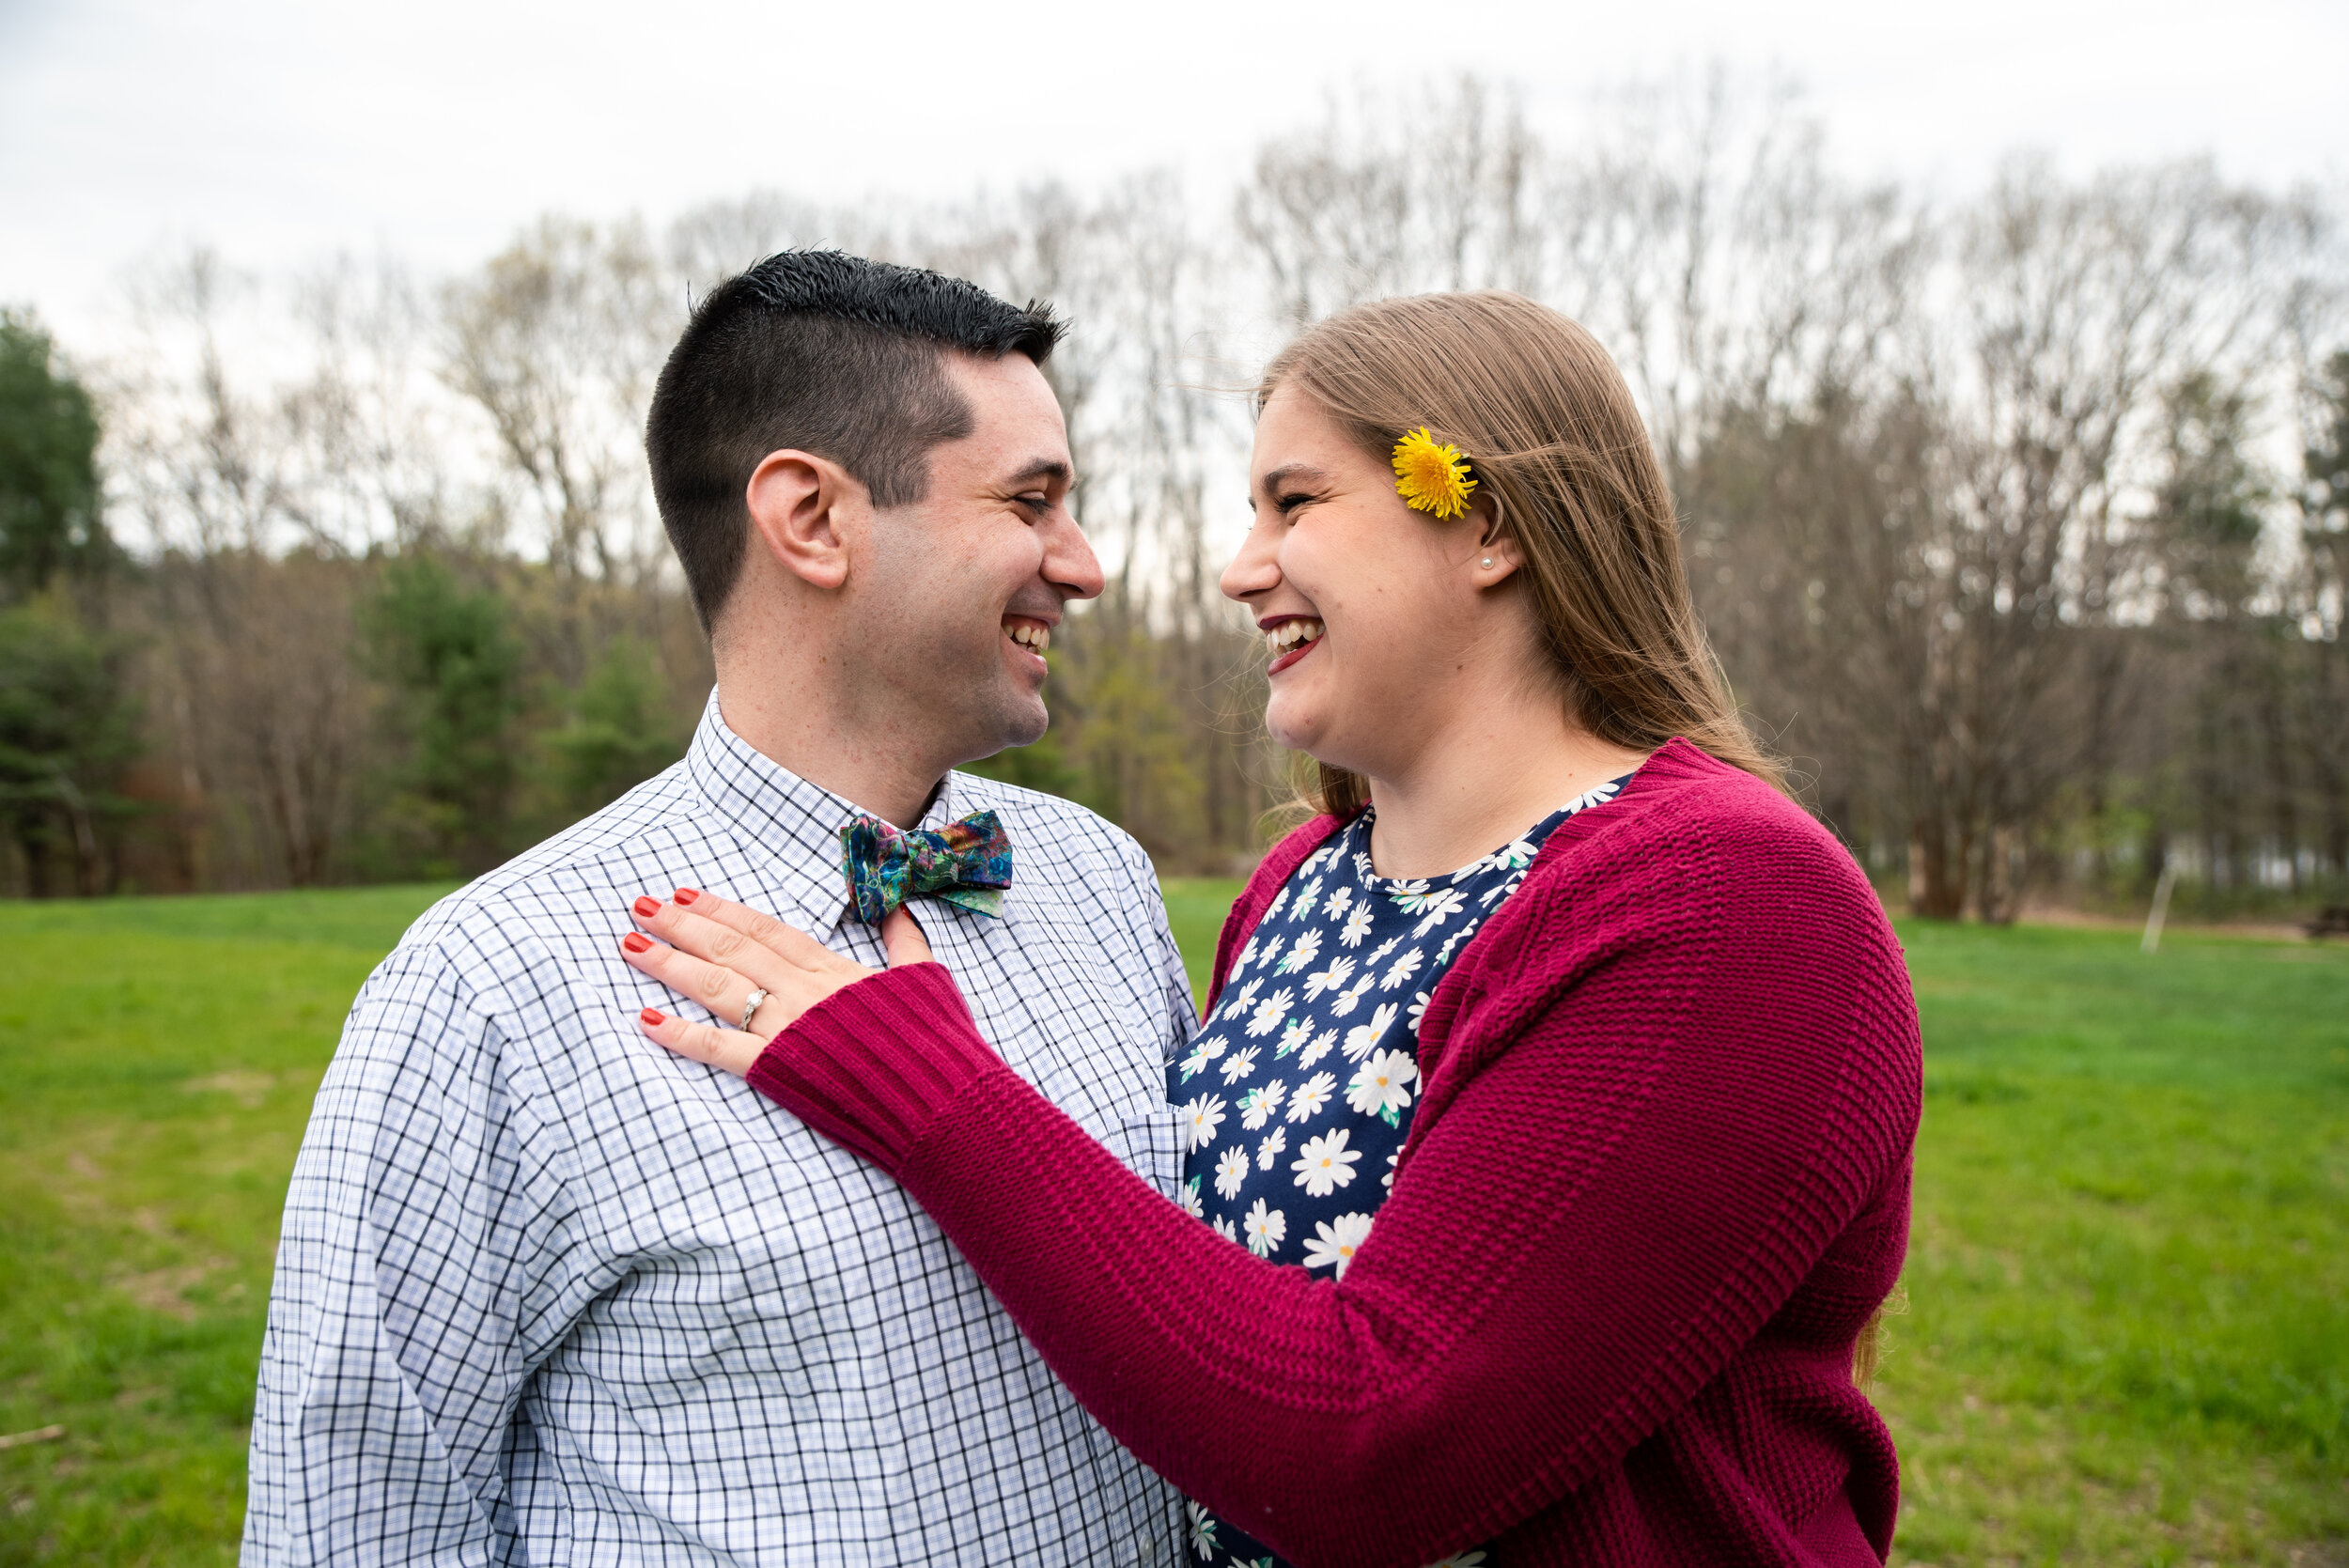 Liz and Josh's engagement photo shoot at Moore State Park in Paxton, MA photographed by Kara Emily Krantz Photography.